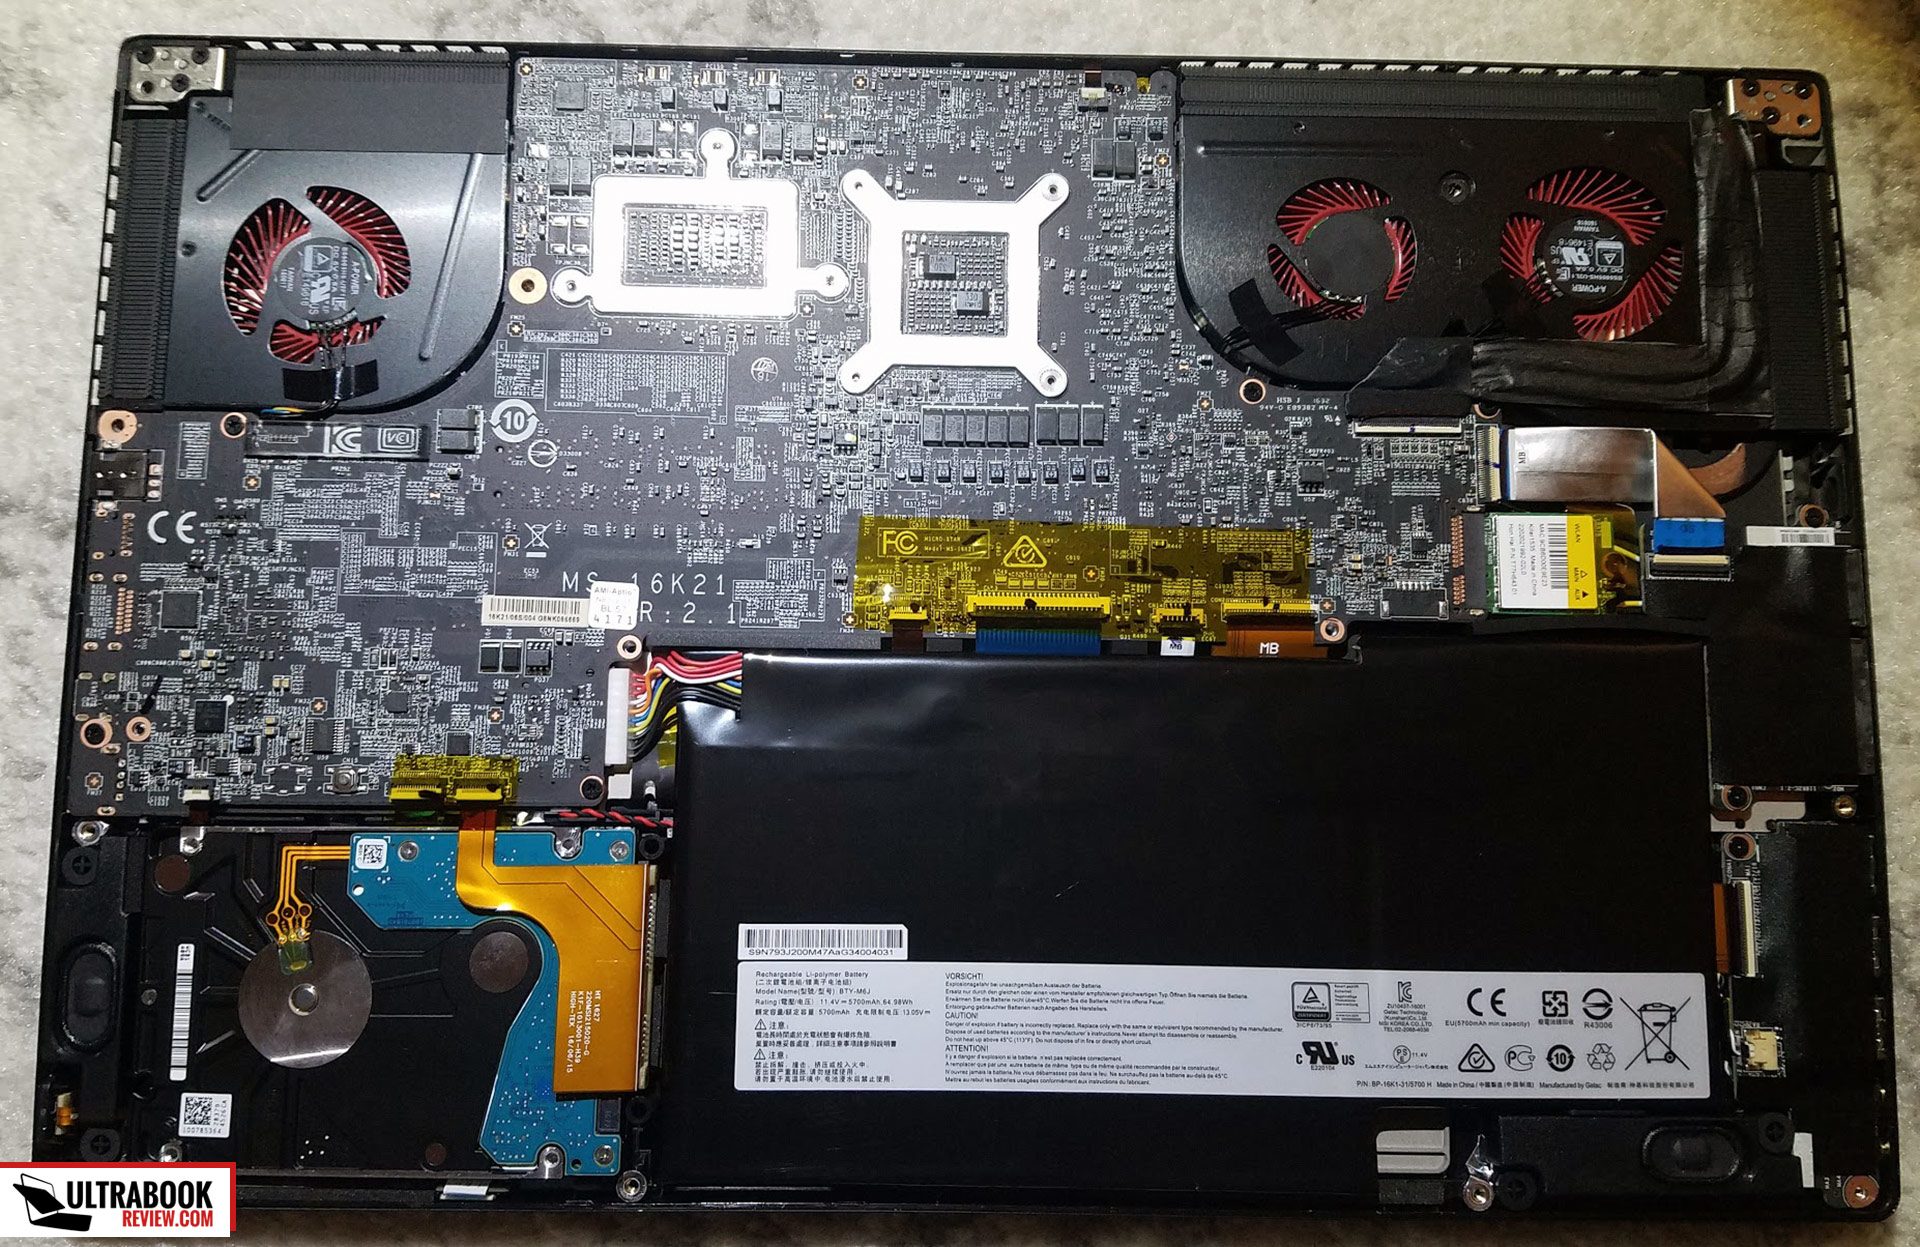 Internals - HDD easily accessible, but the SSD and the RAM are behind the motherboard